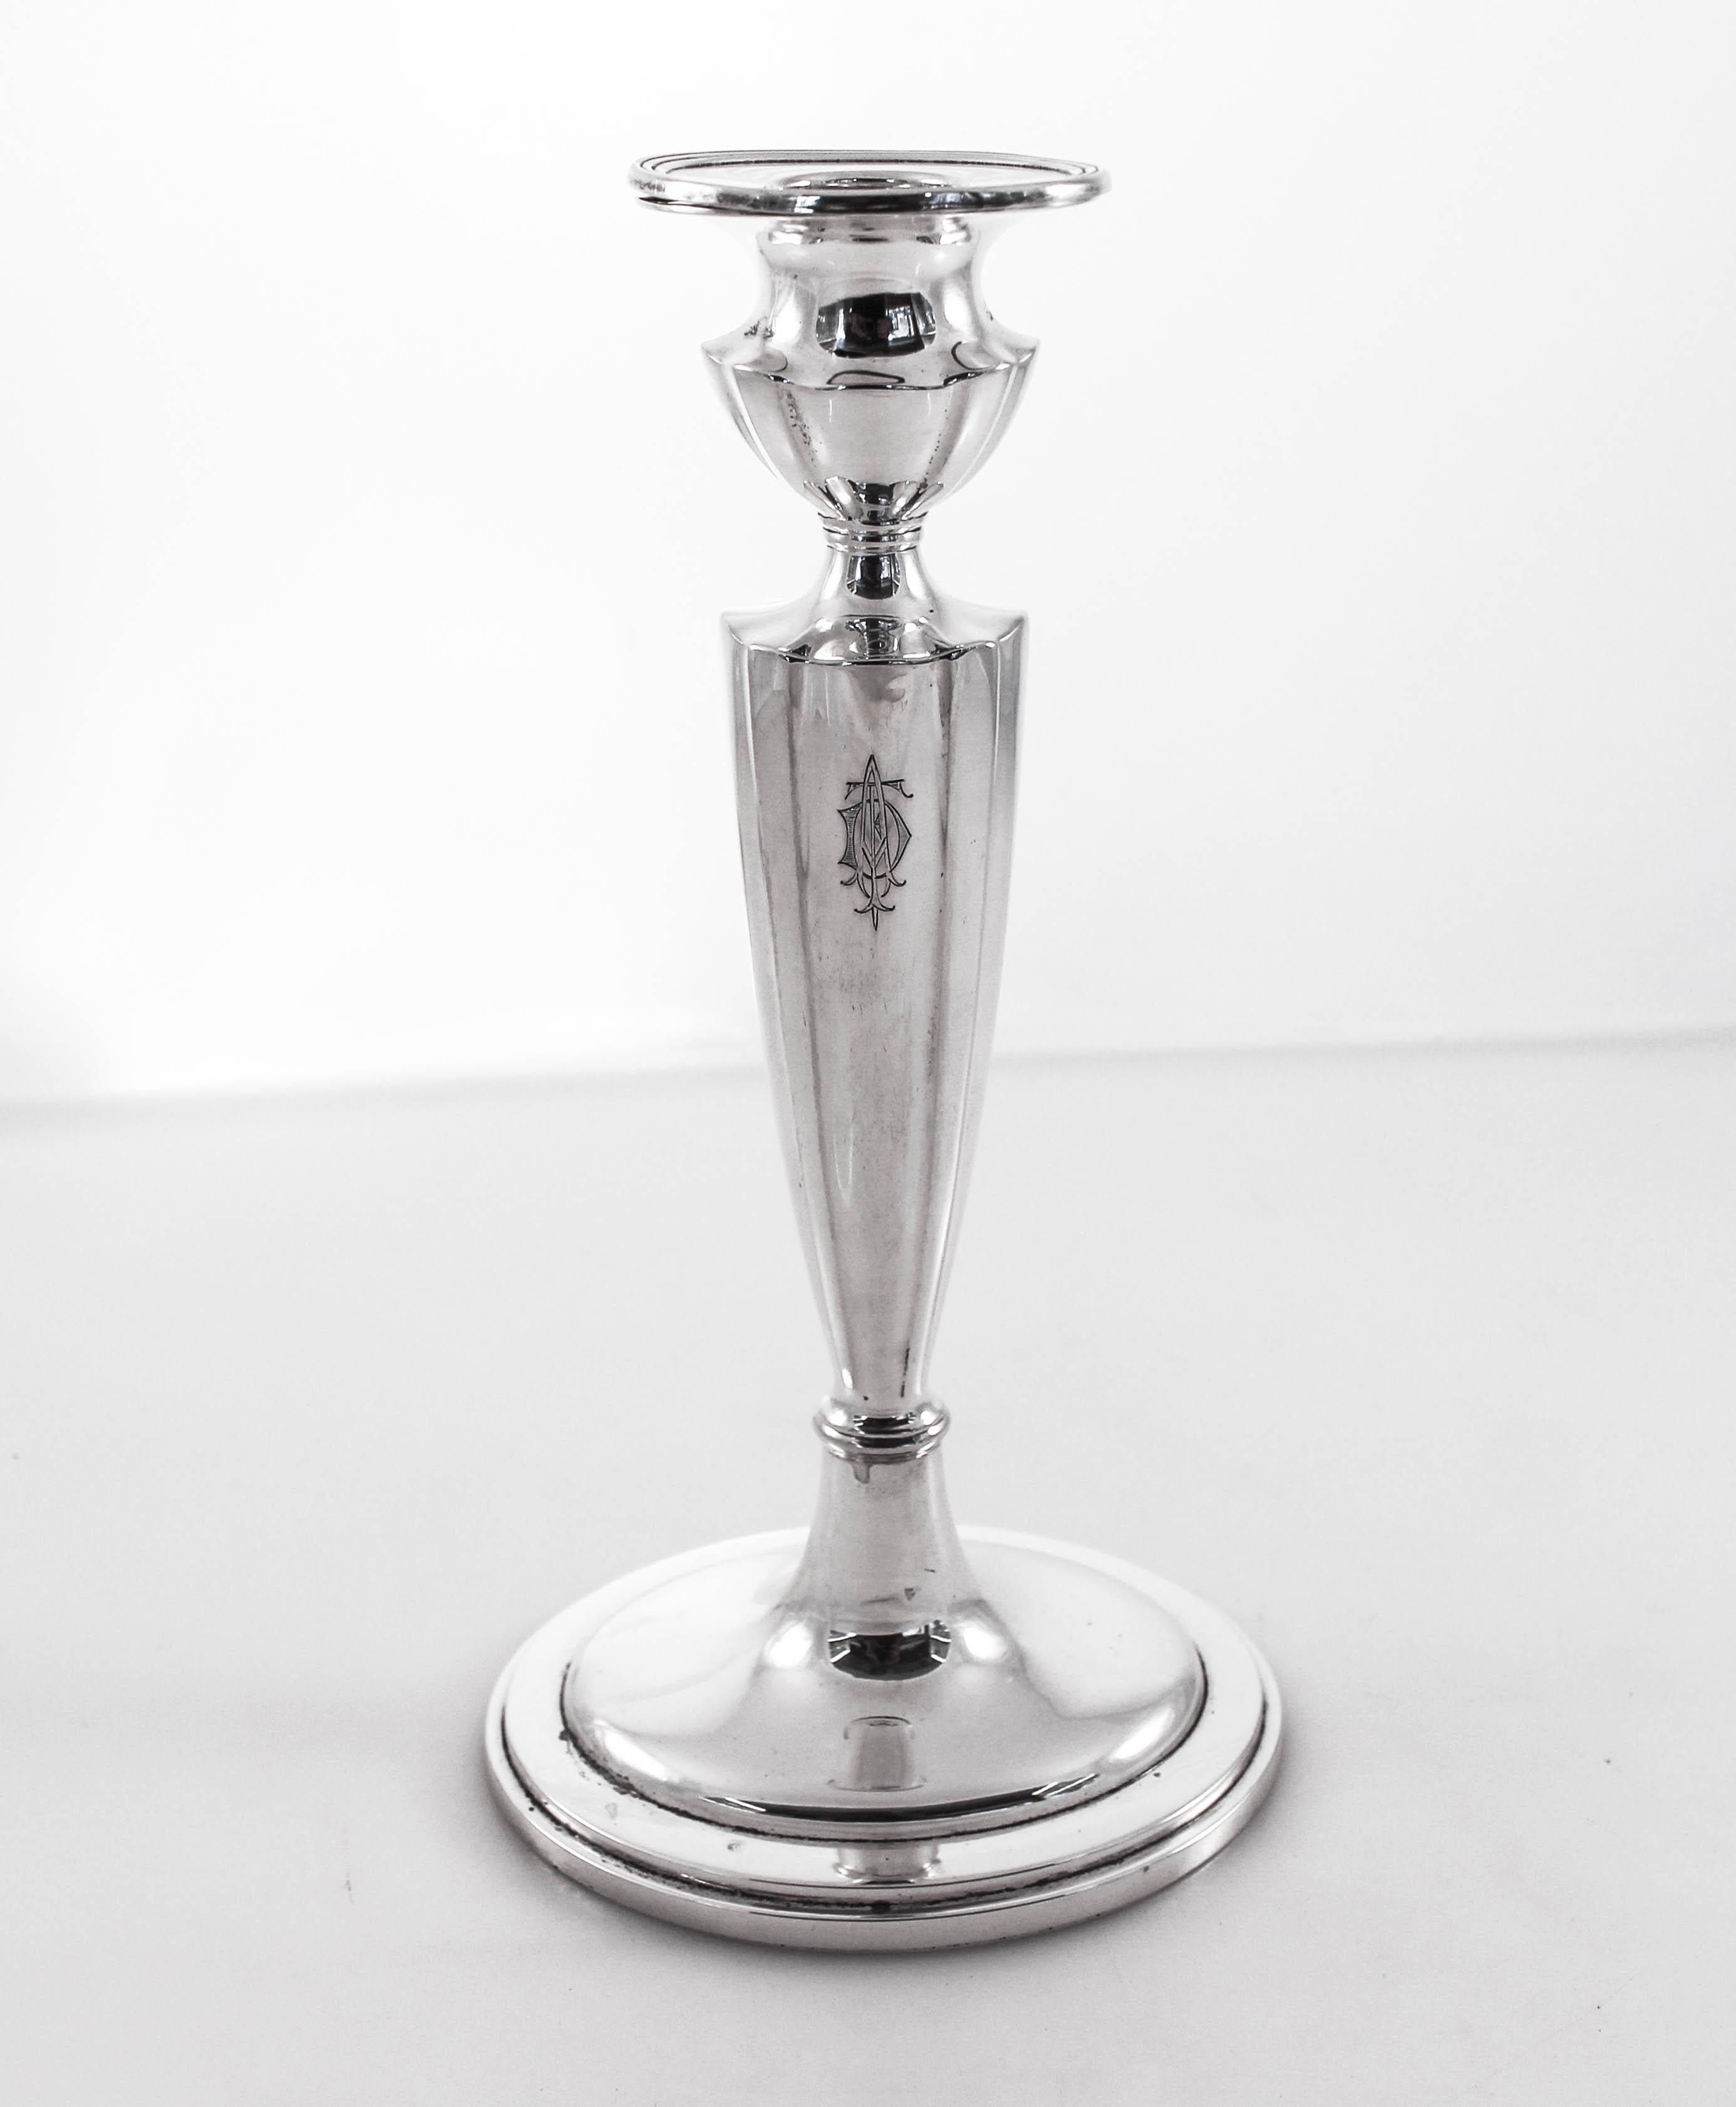 A pair of sterling silver candlesticks by Gorham Silver Company in the “Plymouth” pattern. A tapered body, an oval vase and a ribbed bobeche. Young, modern and functional.